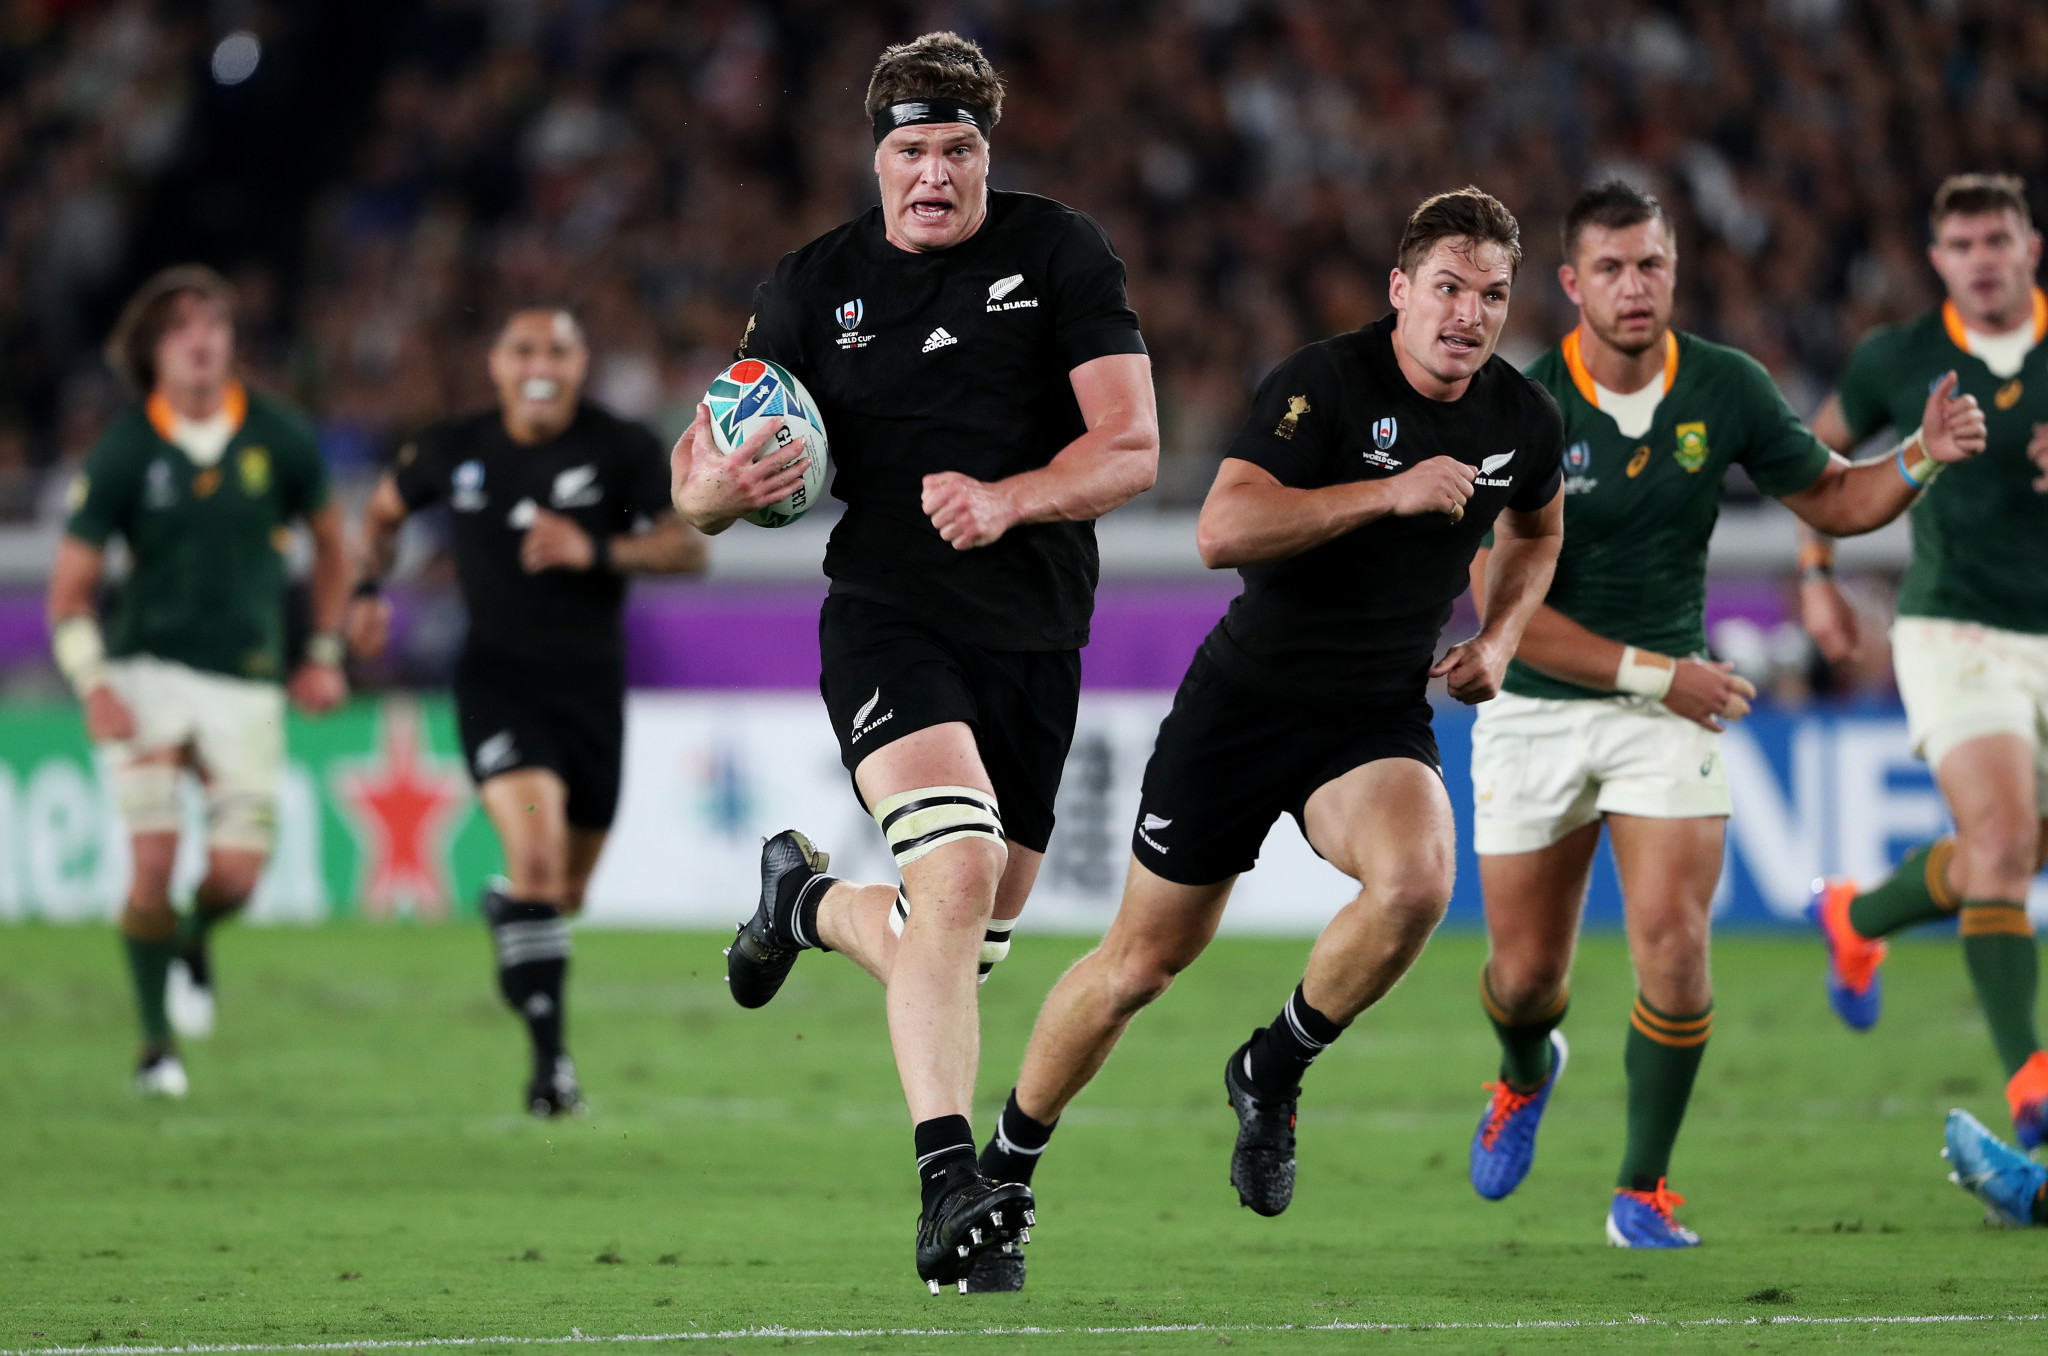 New Zealand edge South Africa in Rugby World Cup on day of thrills